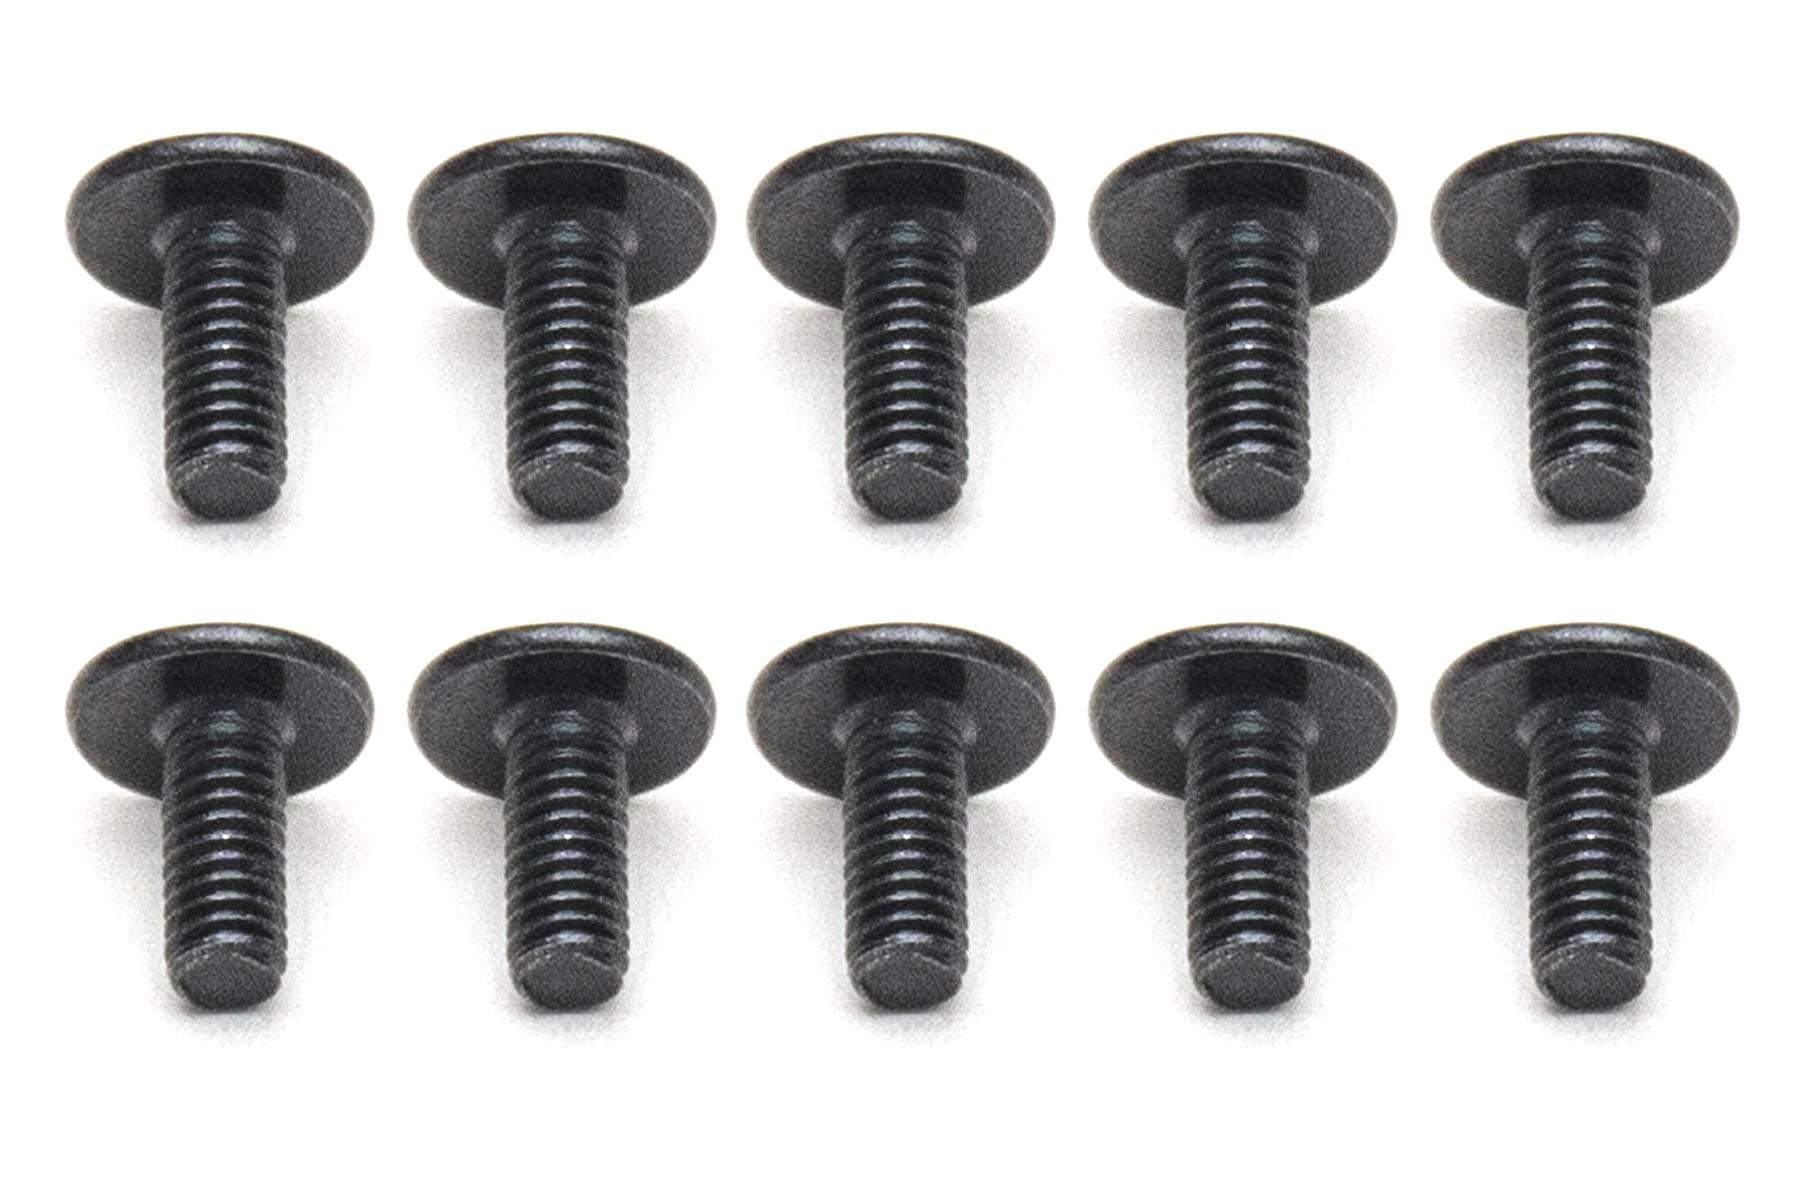 XK 1/18 Scale High Speed Truck M2.5x6x6mm Tapered Screw with Circle Head (10 pcs) WLT-A949-43